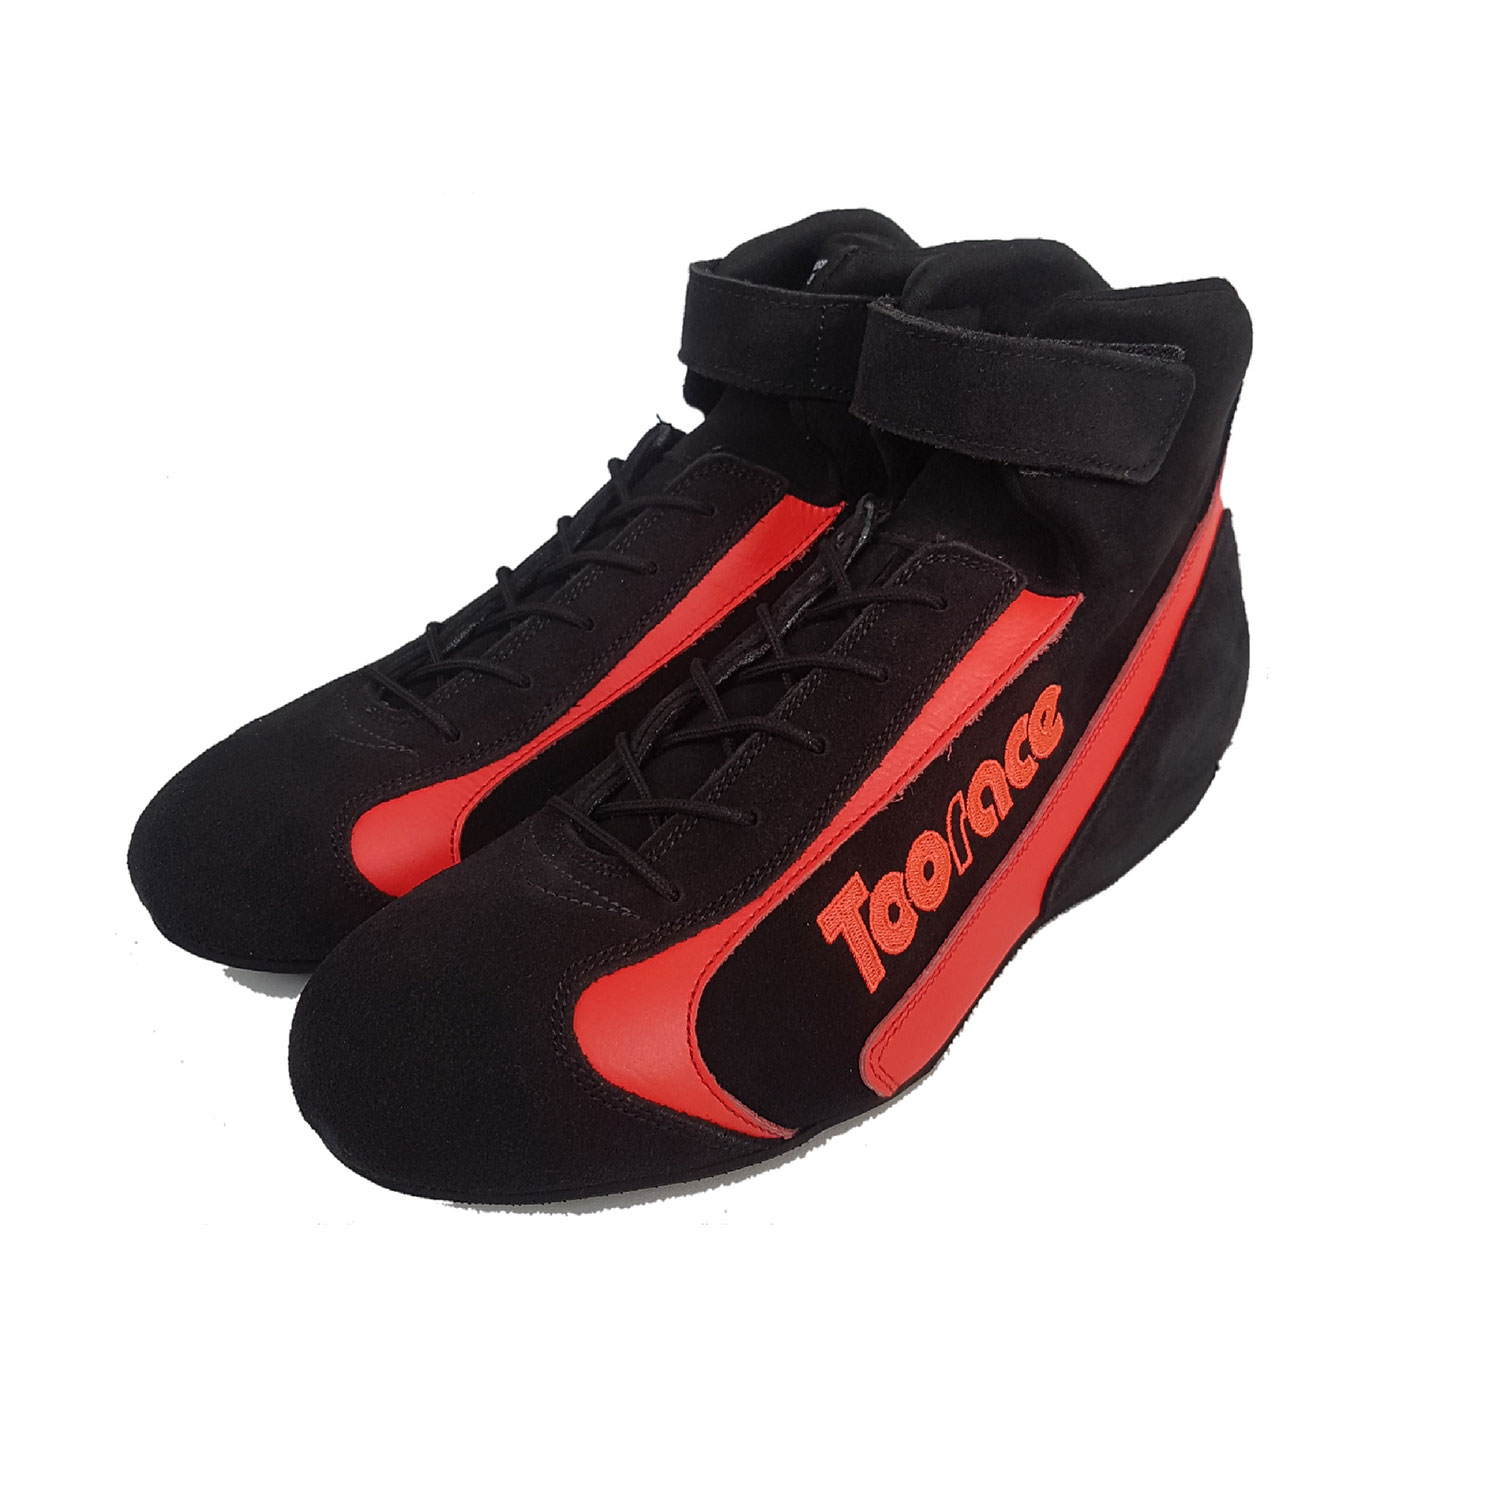 Toorace TRB1 boots | Rally Store – Europe's Racing and Tuning Online ...